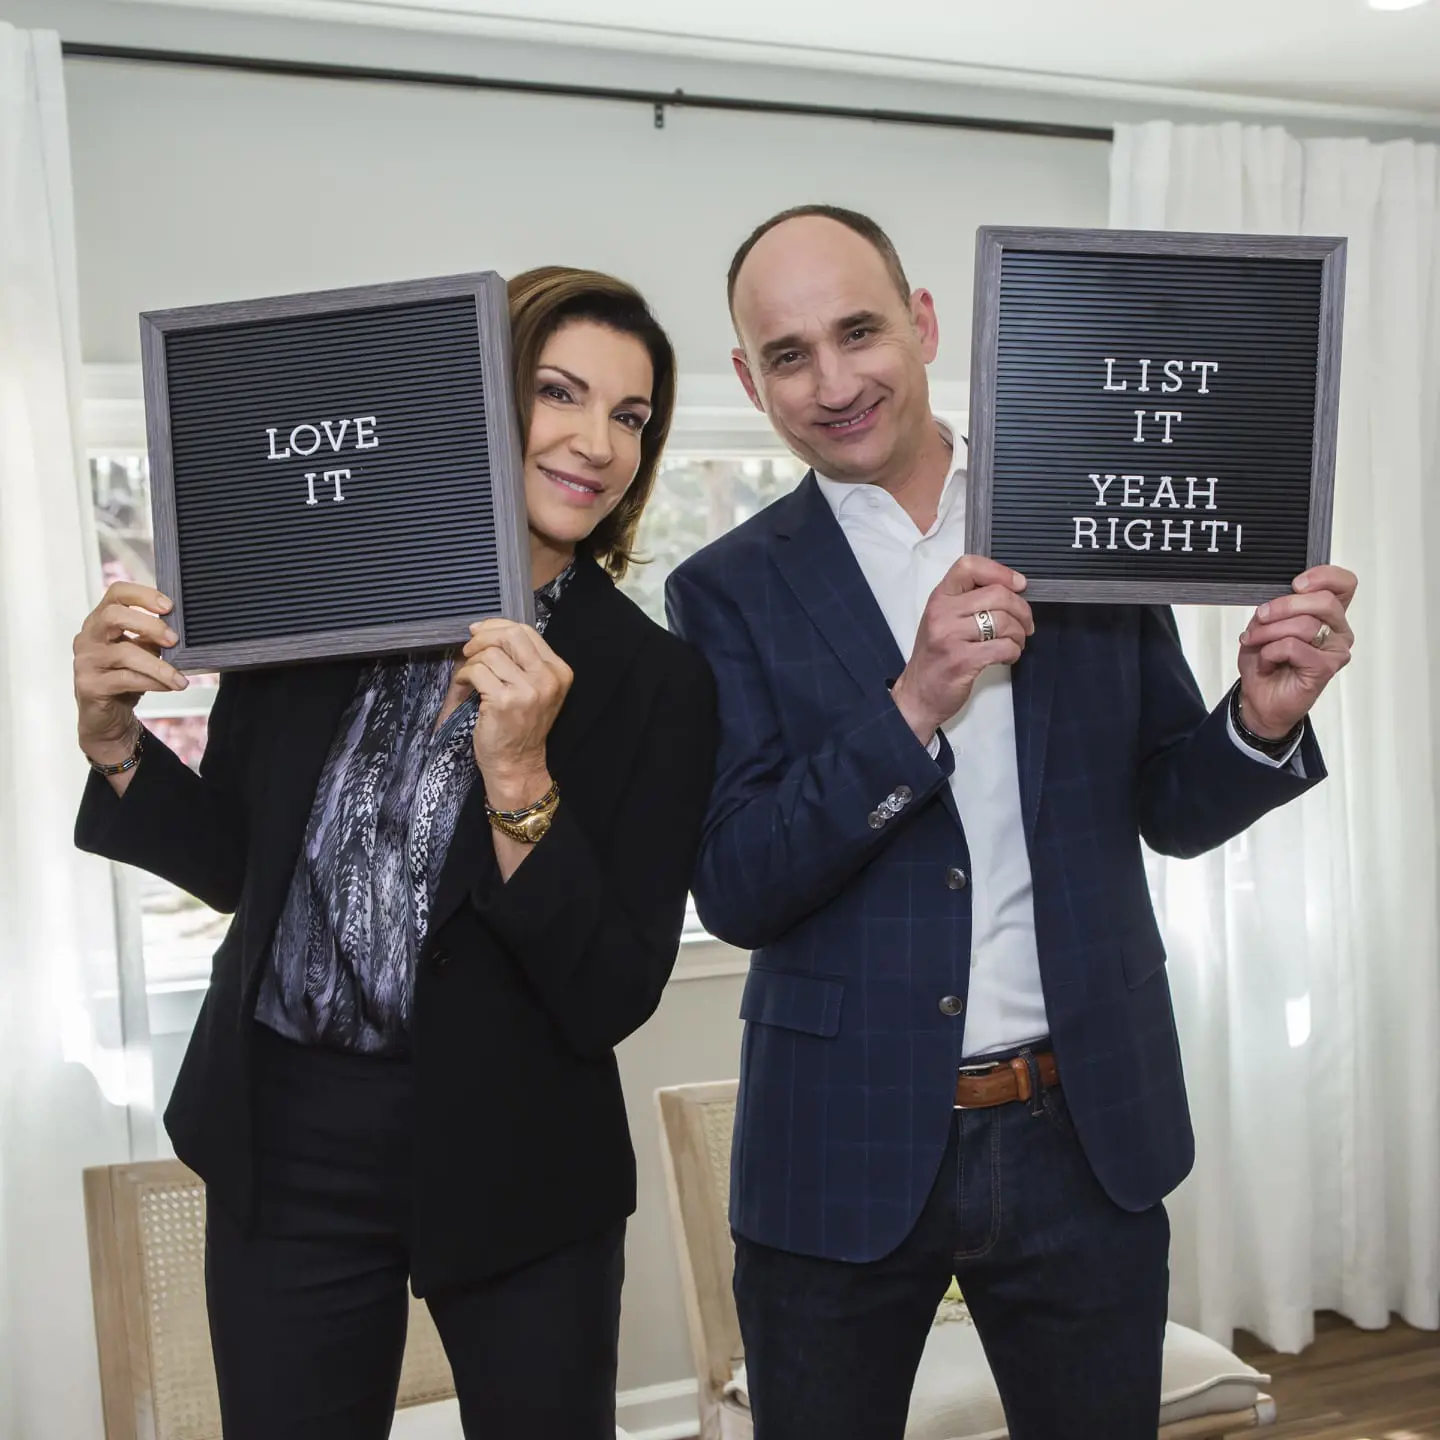 Love It or List It is headed by Hilary Farr and David Visentin.